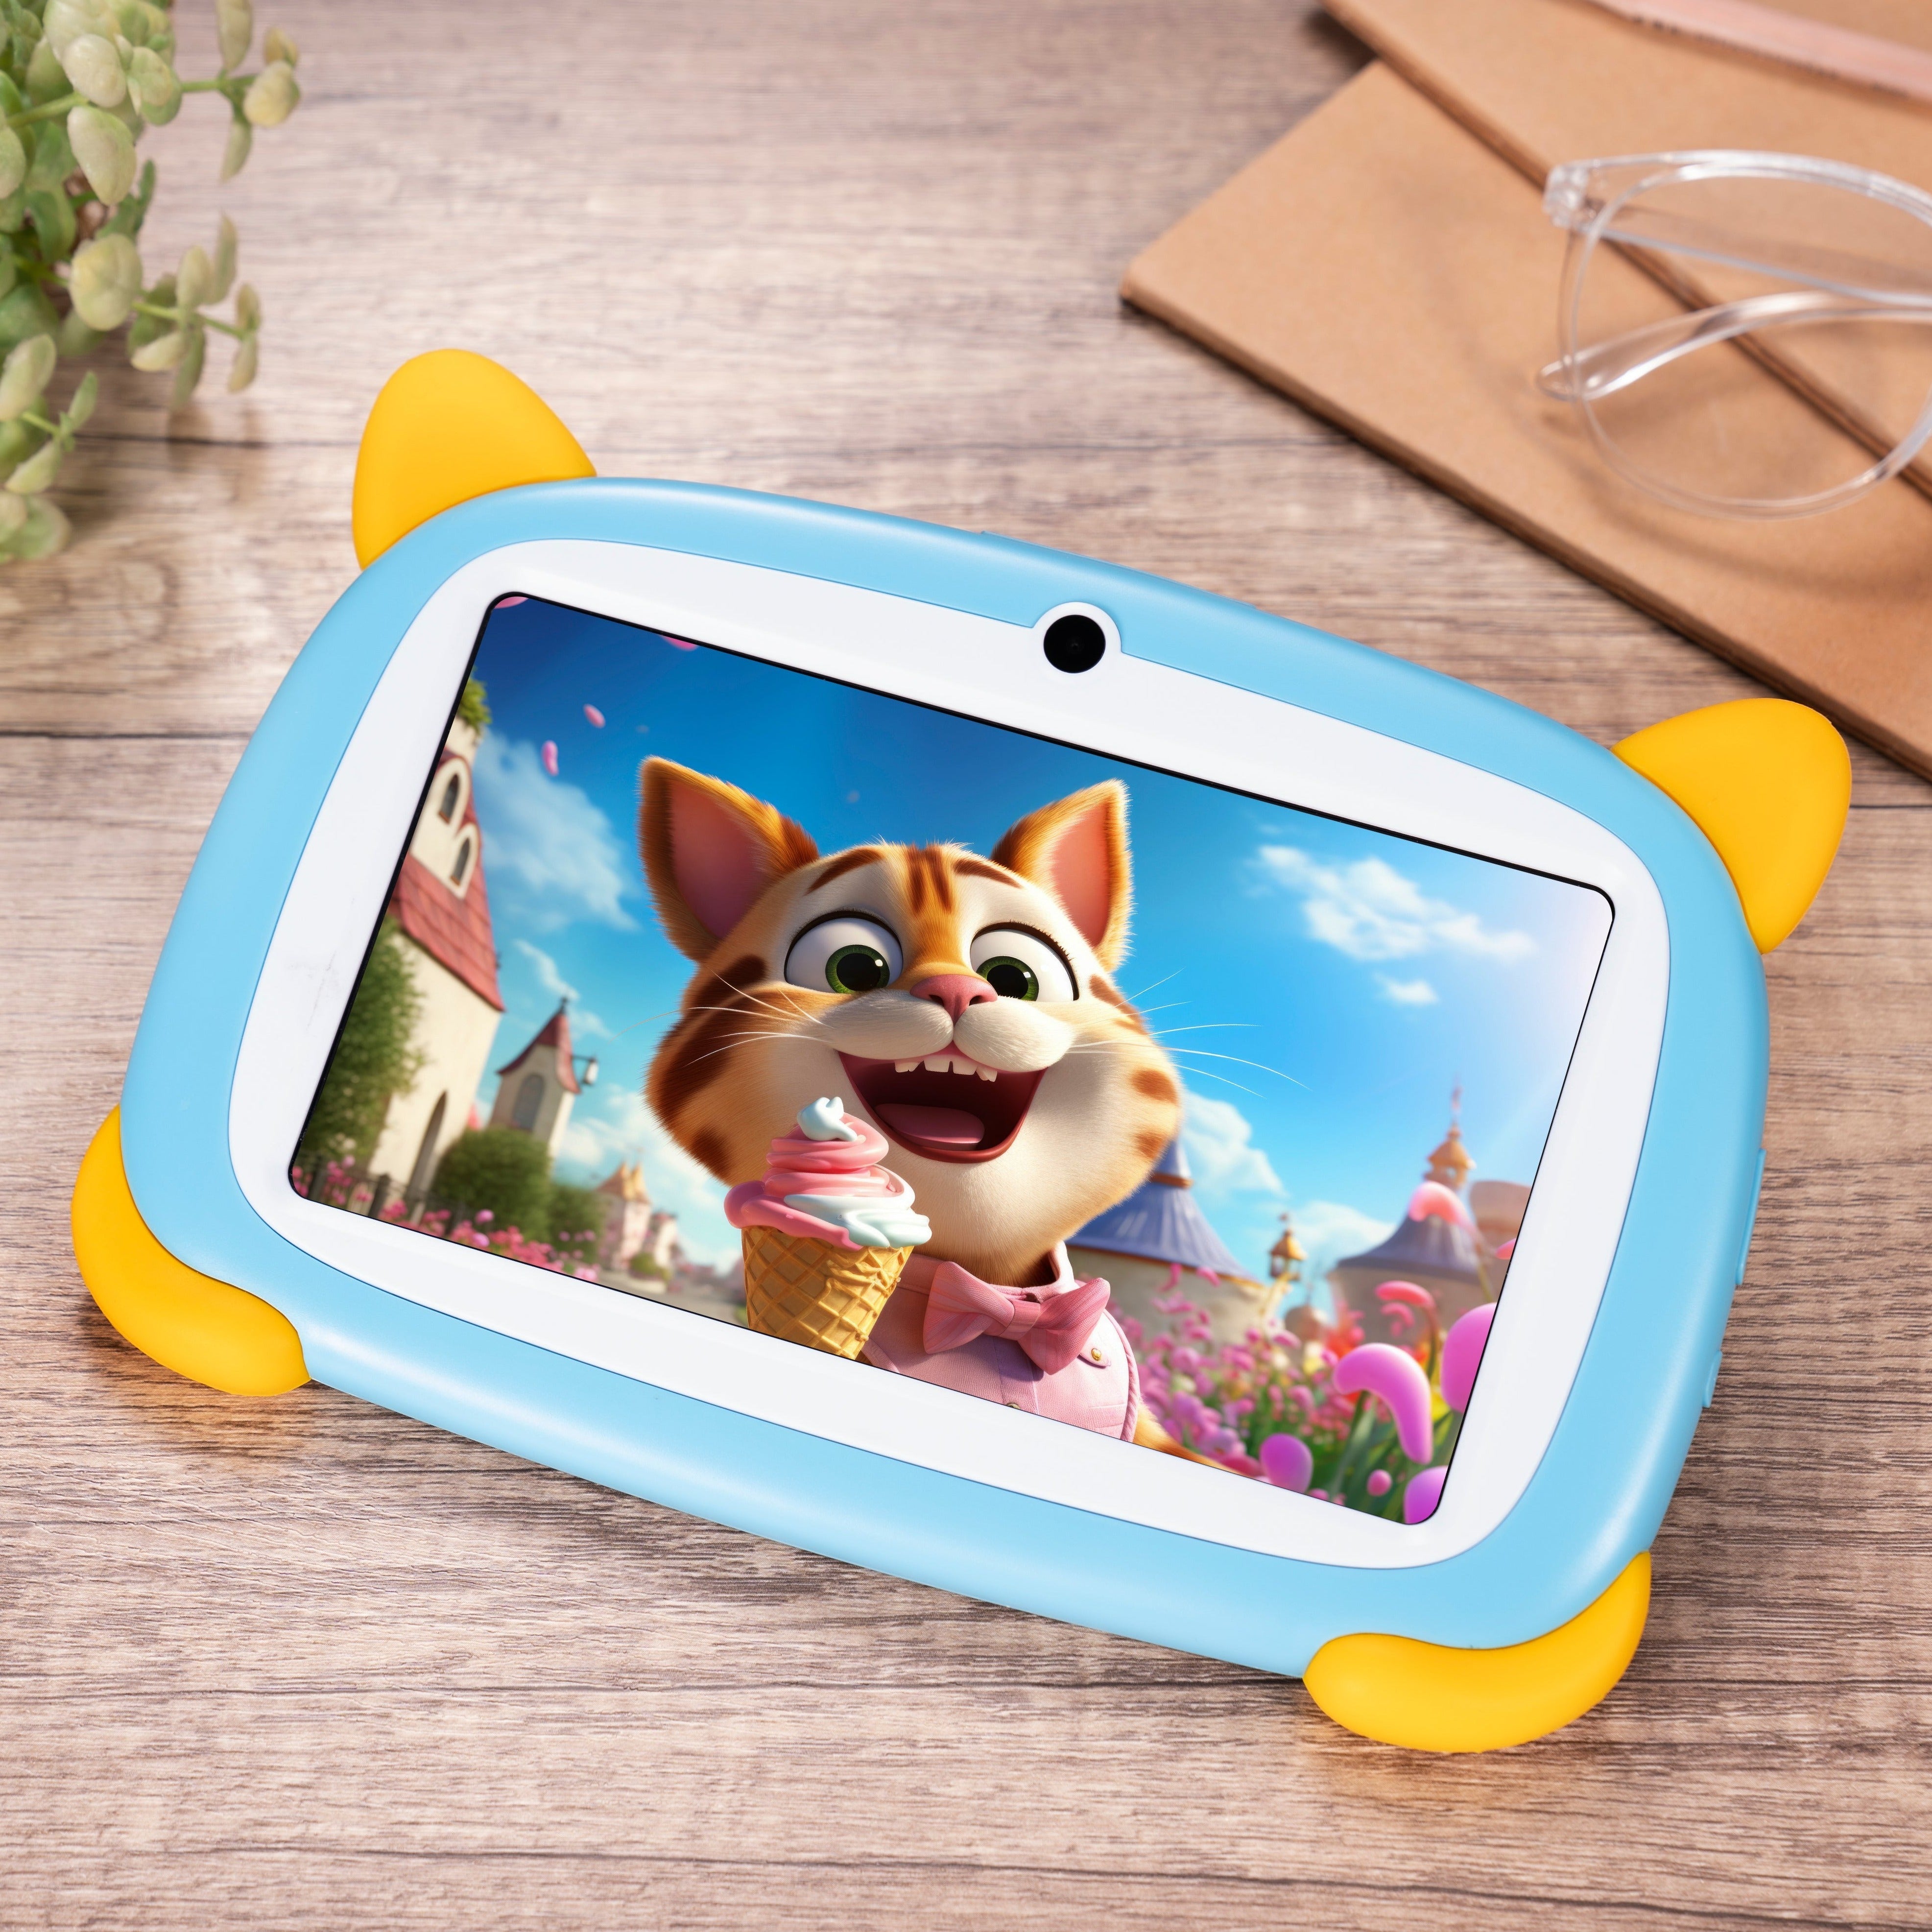 DOOGEE U7 Tablet PC Special Mini Size for Kids